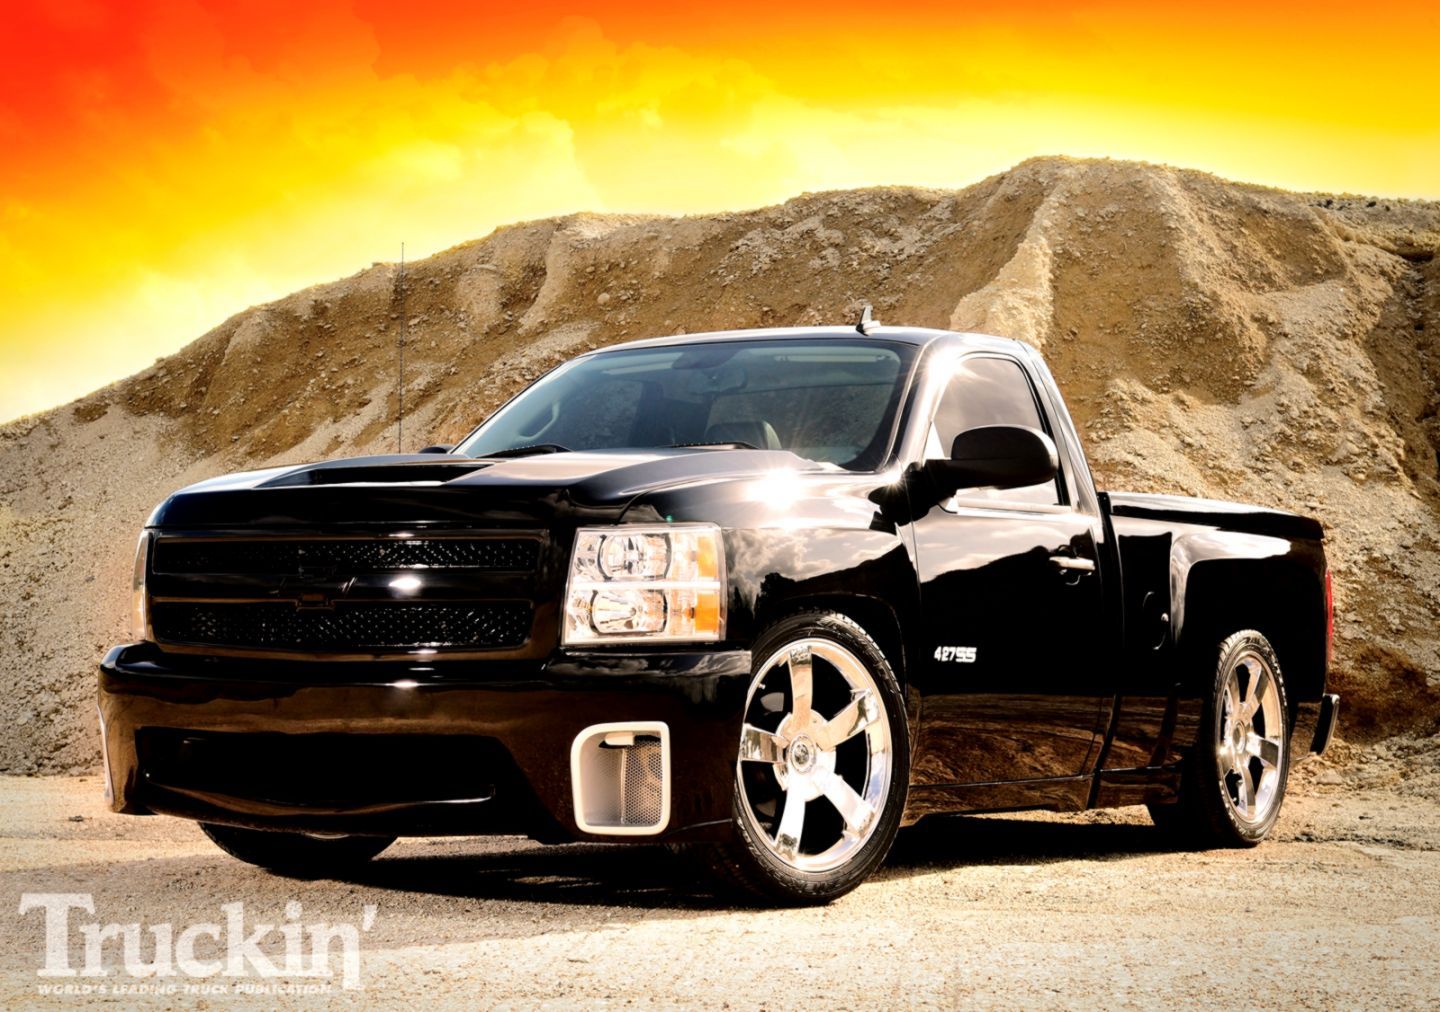 Truckin Wallpapers posted by Ryan Johnson